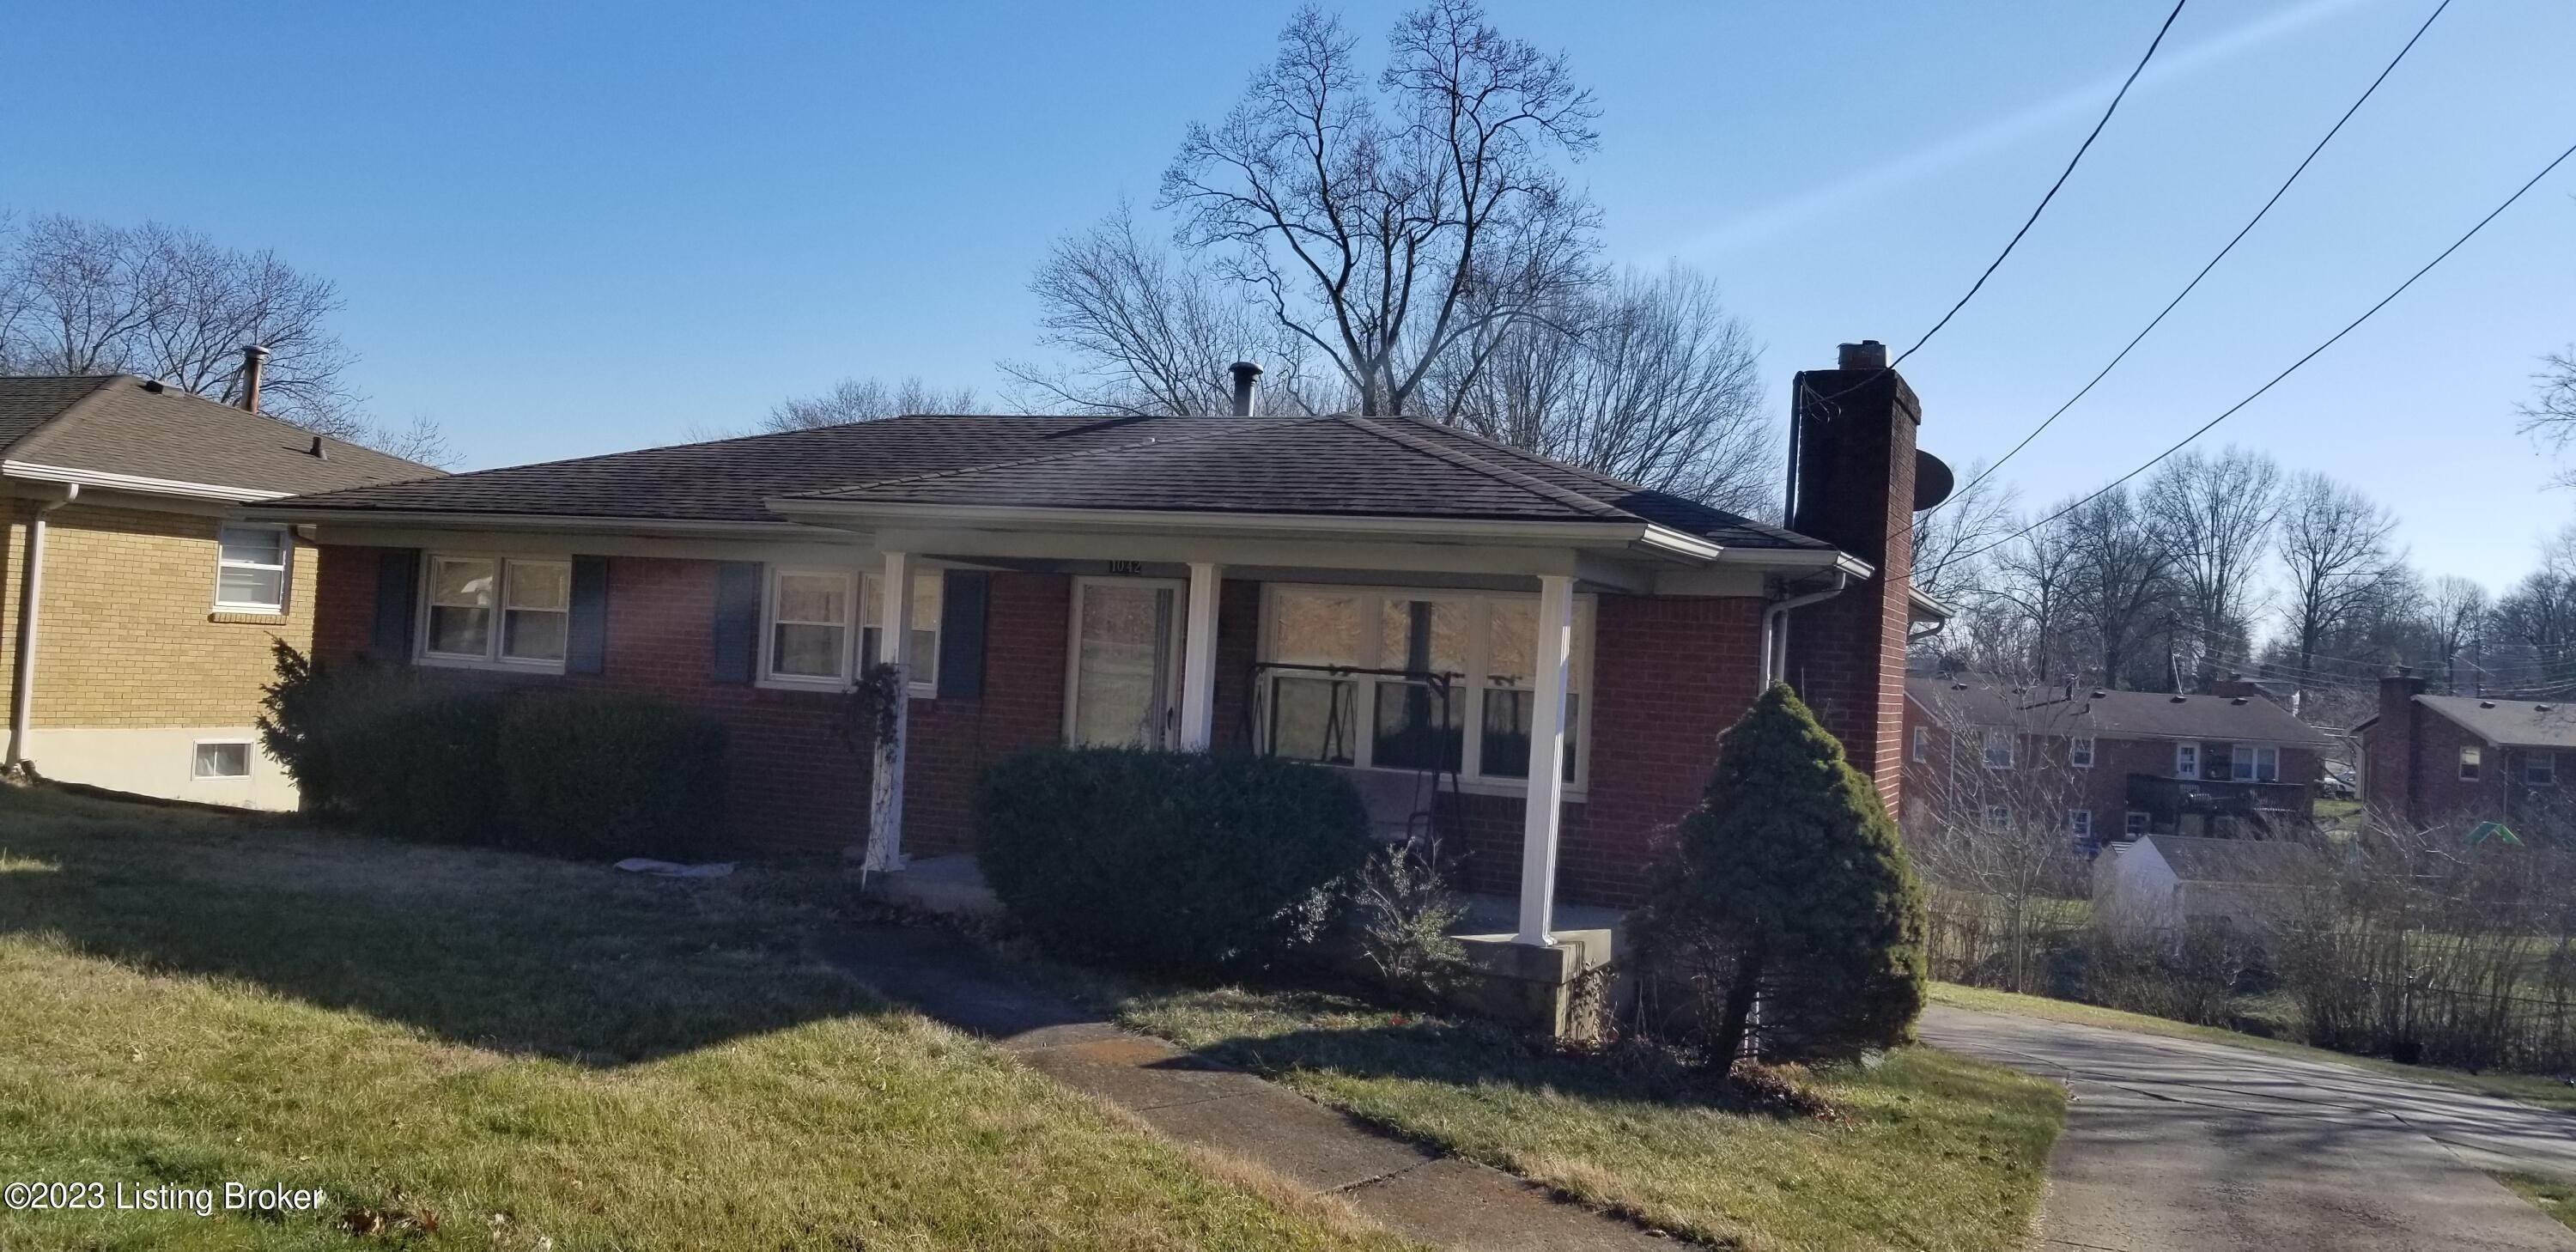 Single Family at Louisville, KY 40214